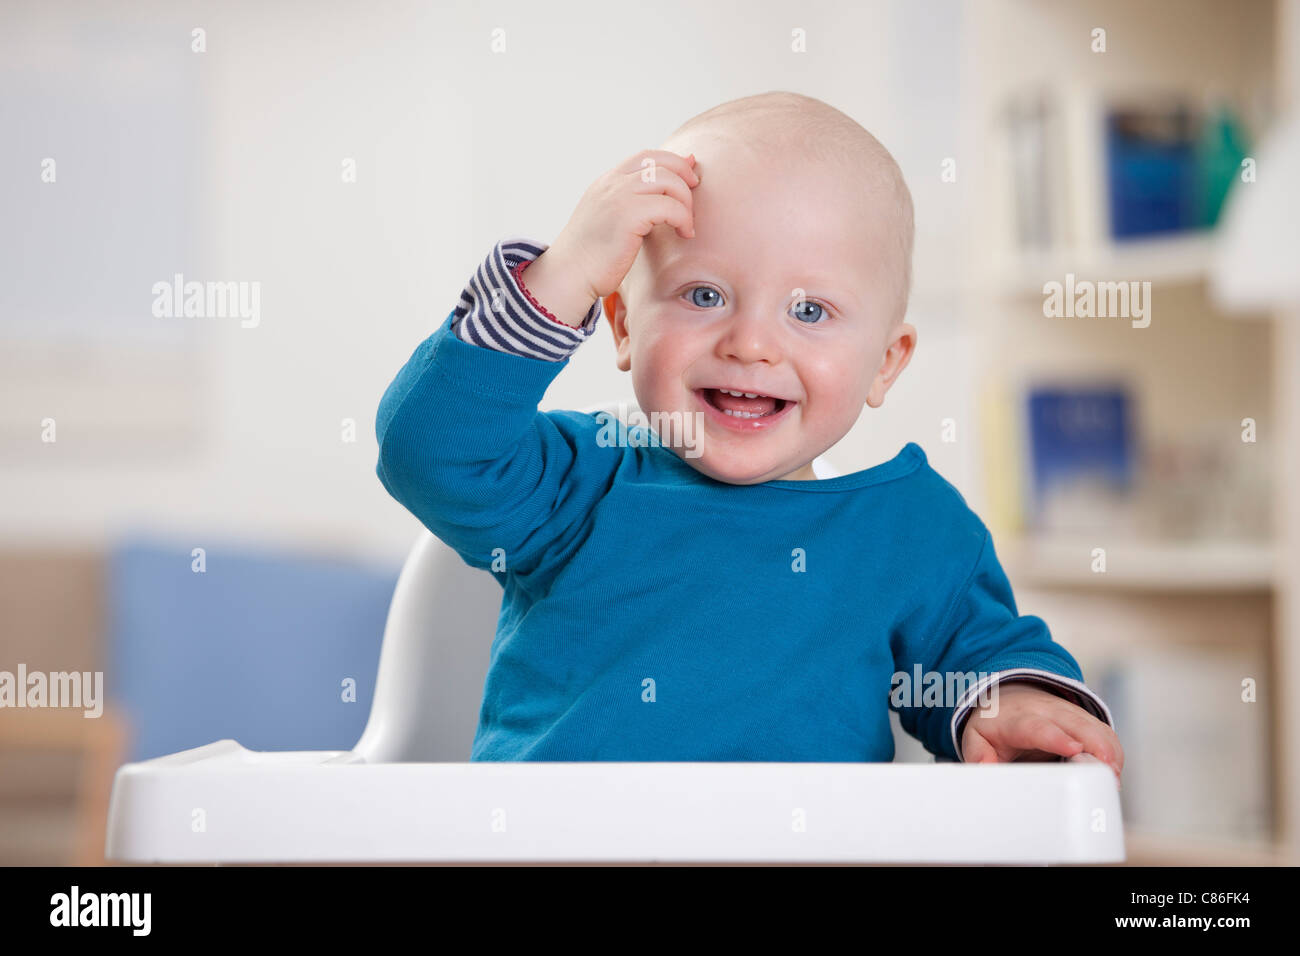 Smiling baby boy sitting in chaise haute Banque D'Images